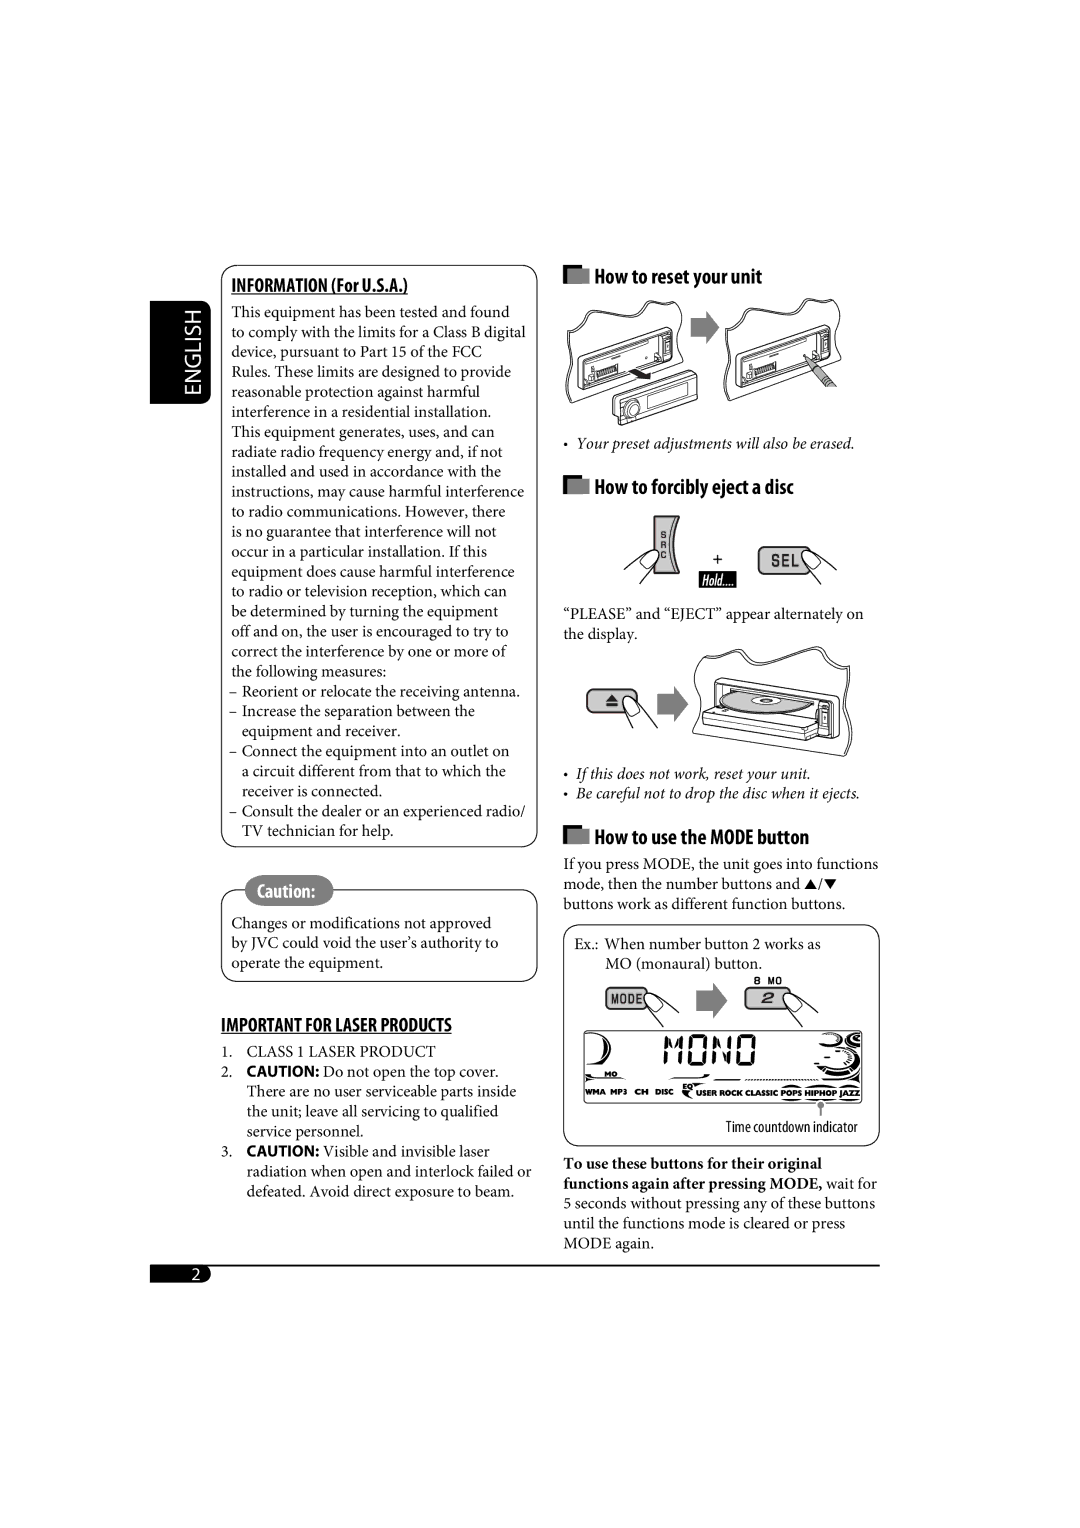 JVC KD-AR770, KD-G720 manual Information For U.S.A, Important for Laser Products 